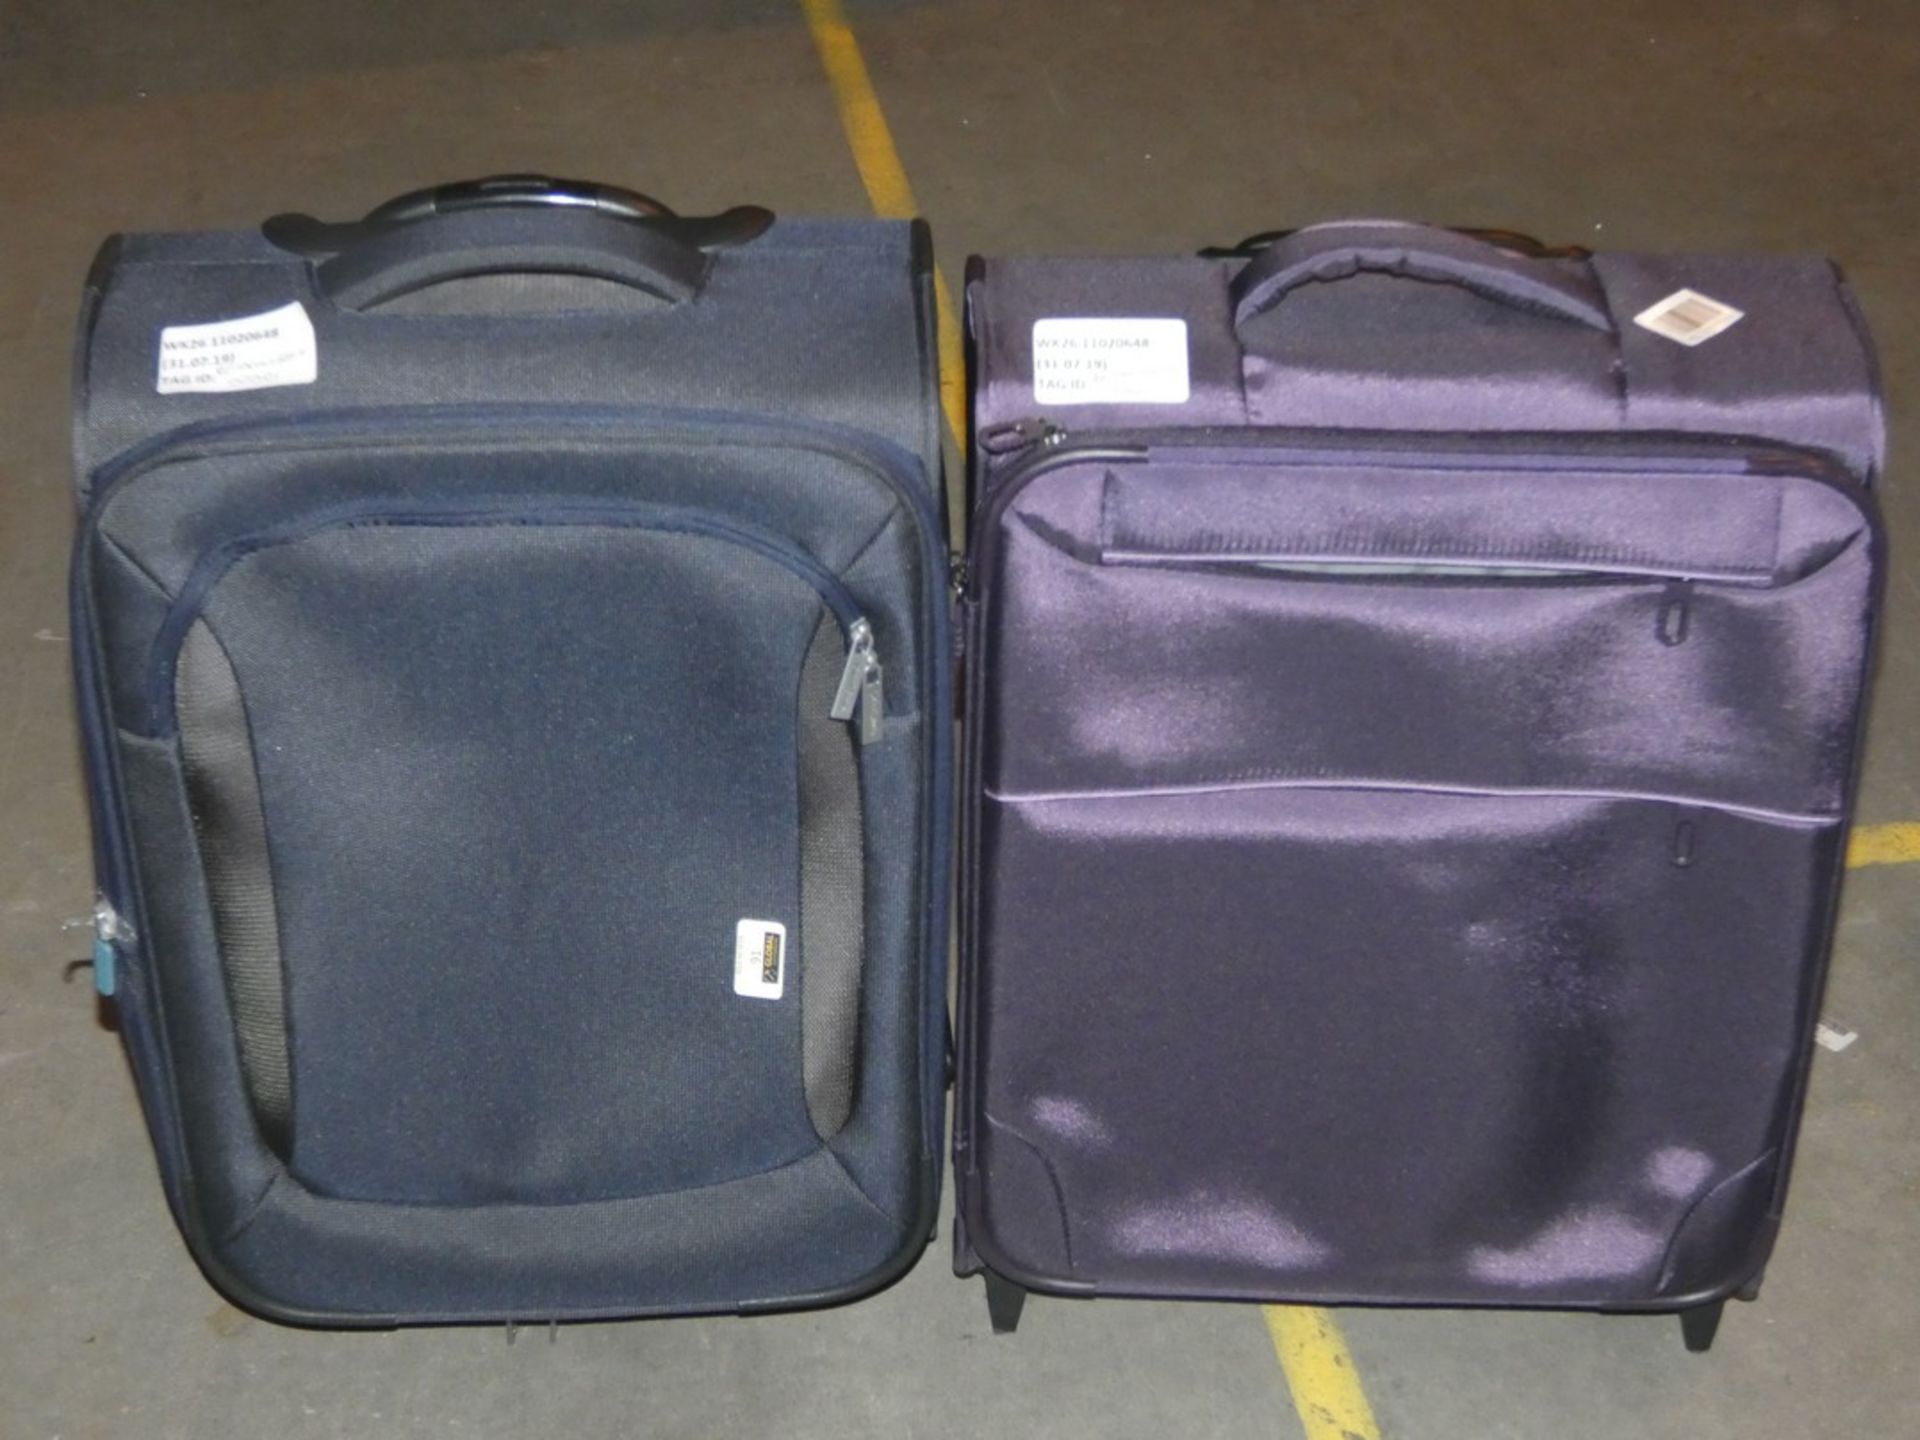 Soft Shell 2 Wheel Cabin Bags RRP £70-90 (2302233) (RETR00095533) (RET00426627) (Viewings And